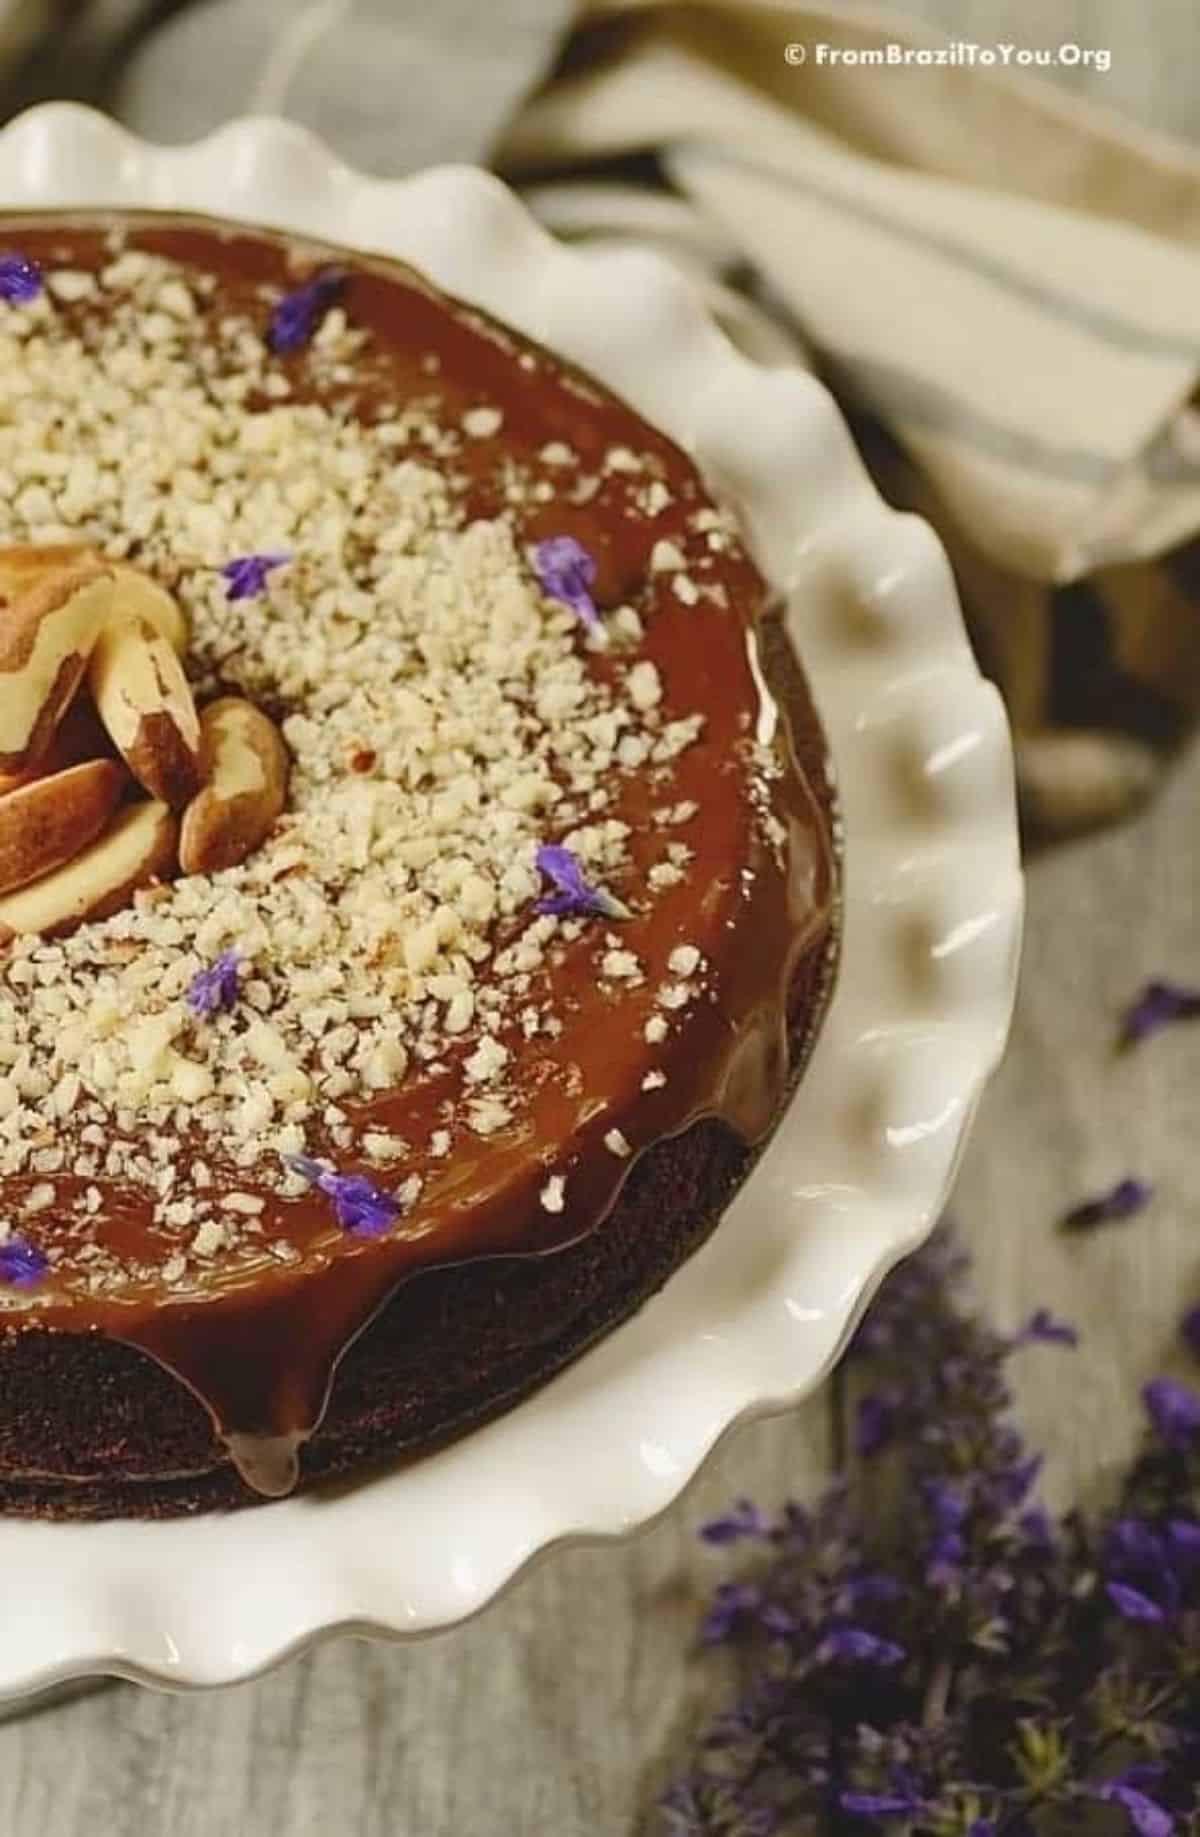 Mouth-watering flourless chocolate nut cake on a cake tray.